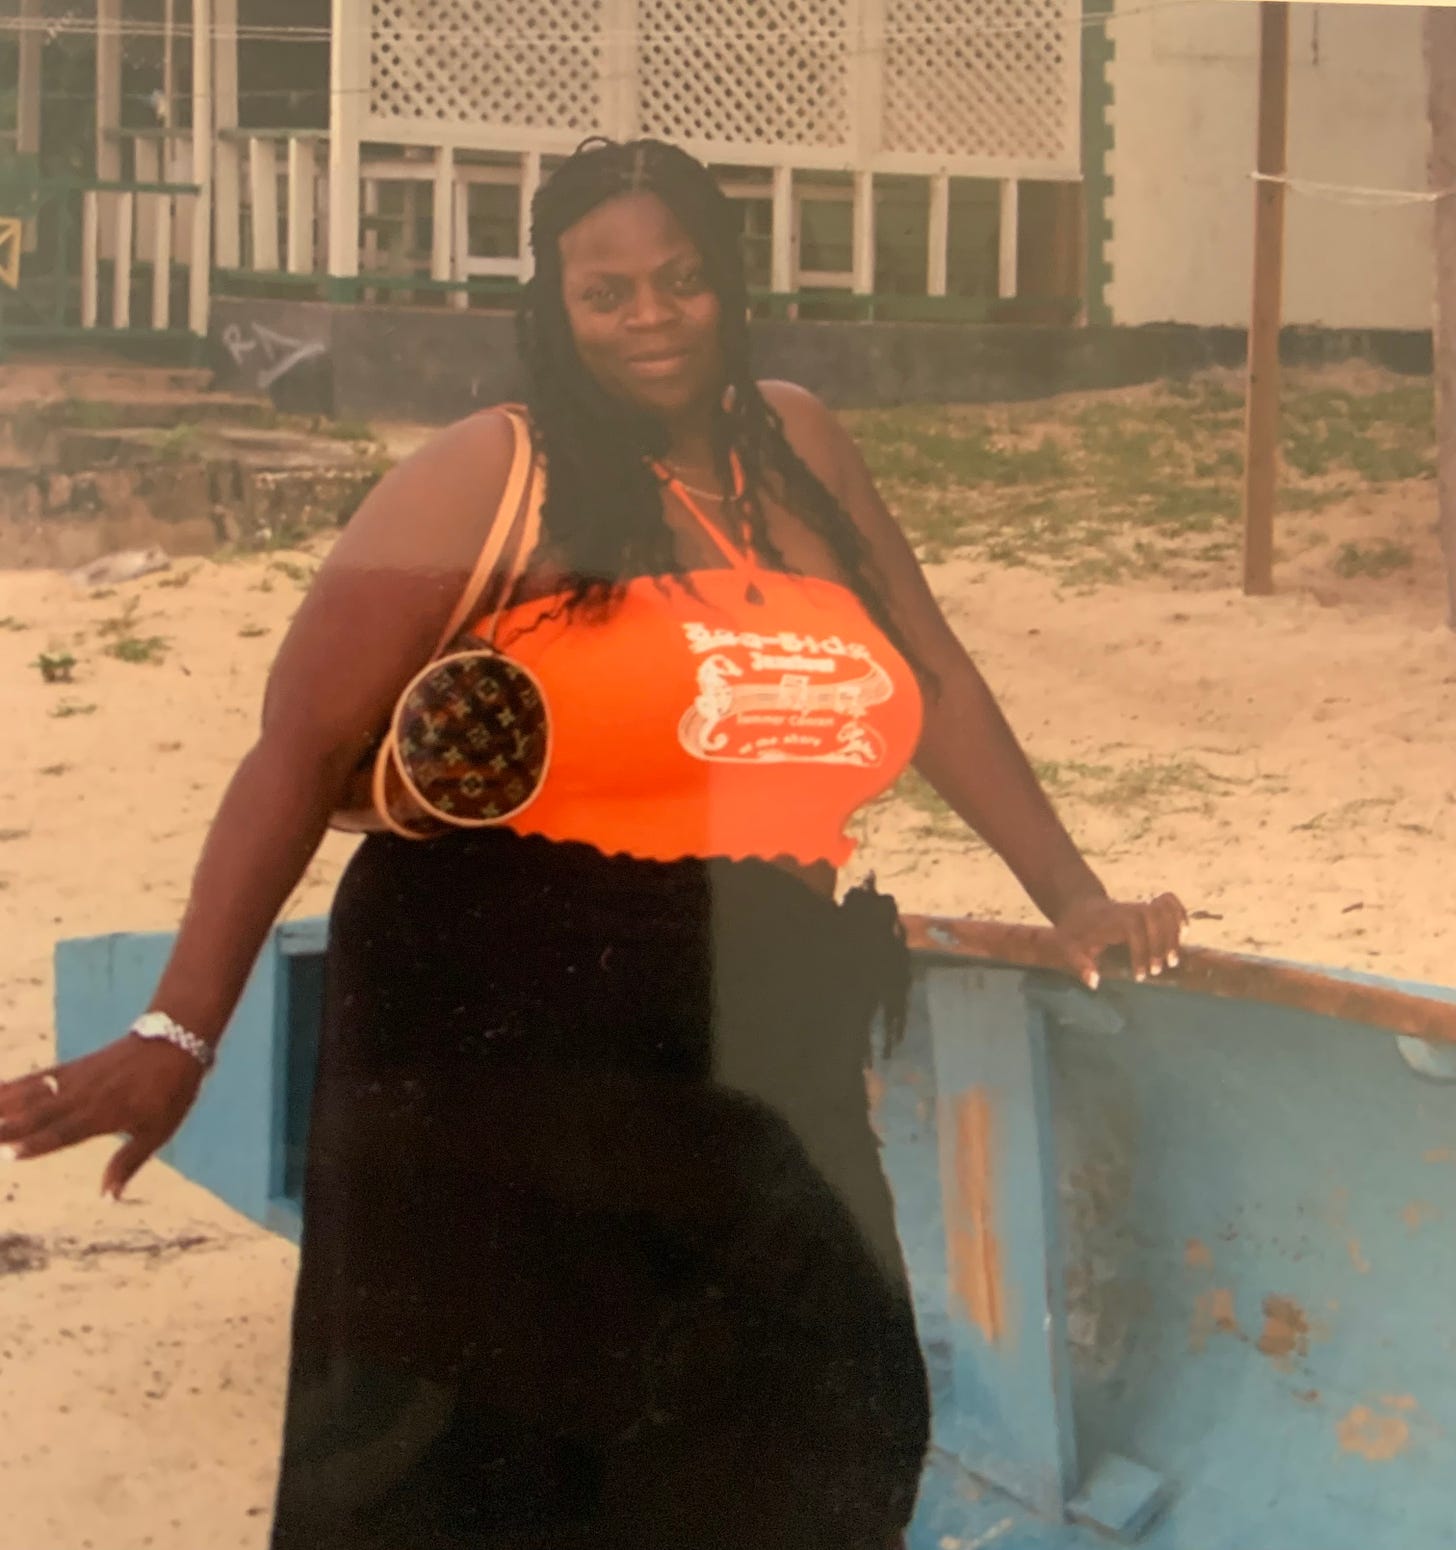 Black woman poses on a beach with a black skirt, orange halter top, leaning on a boat.